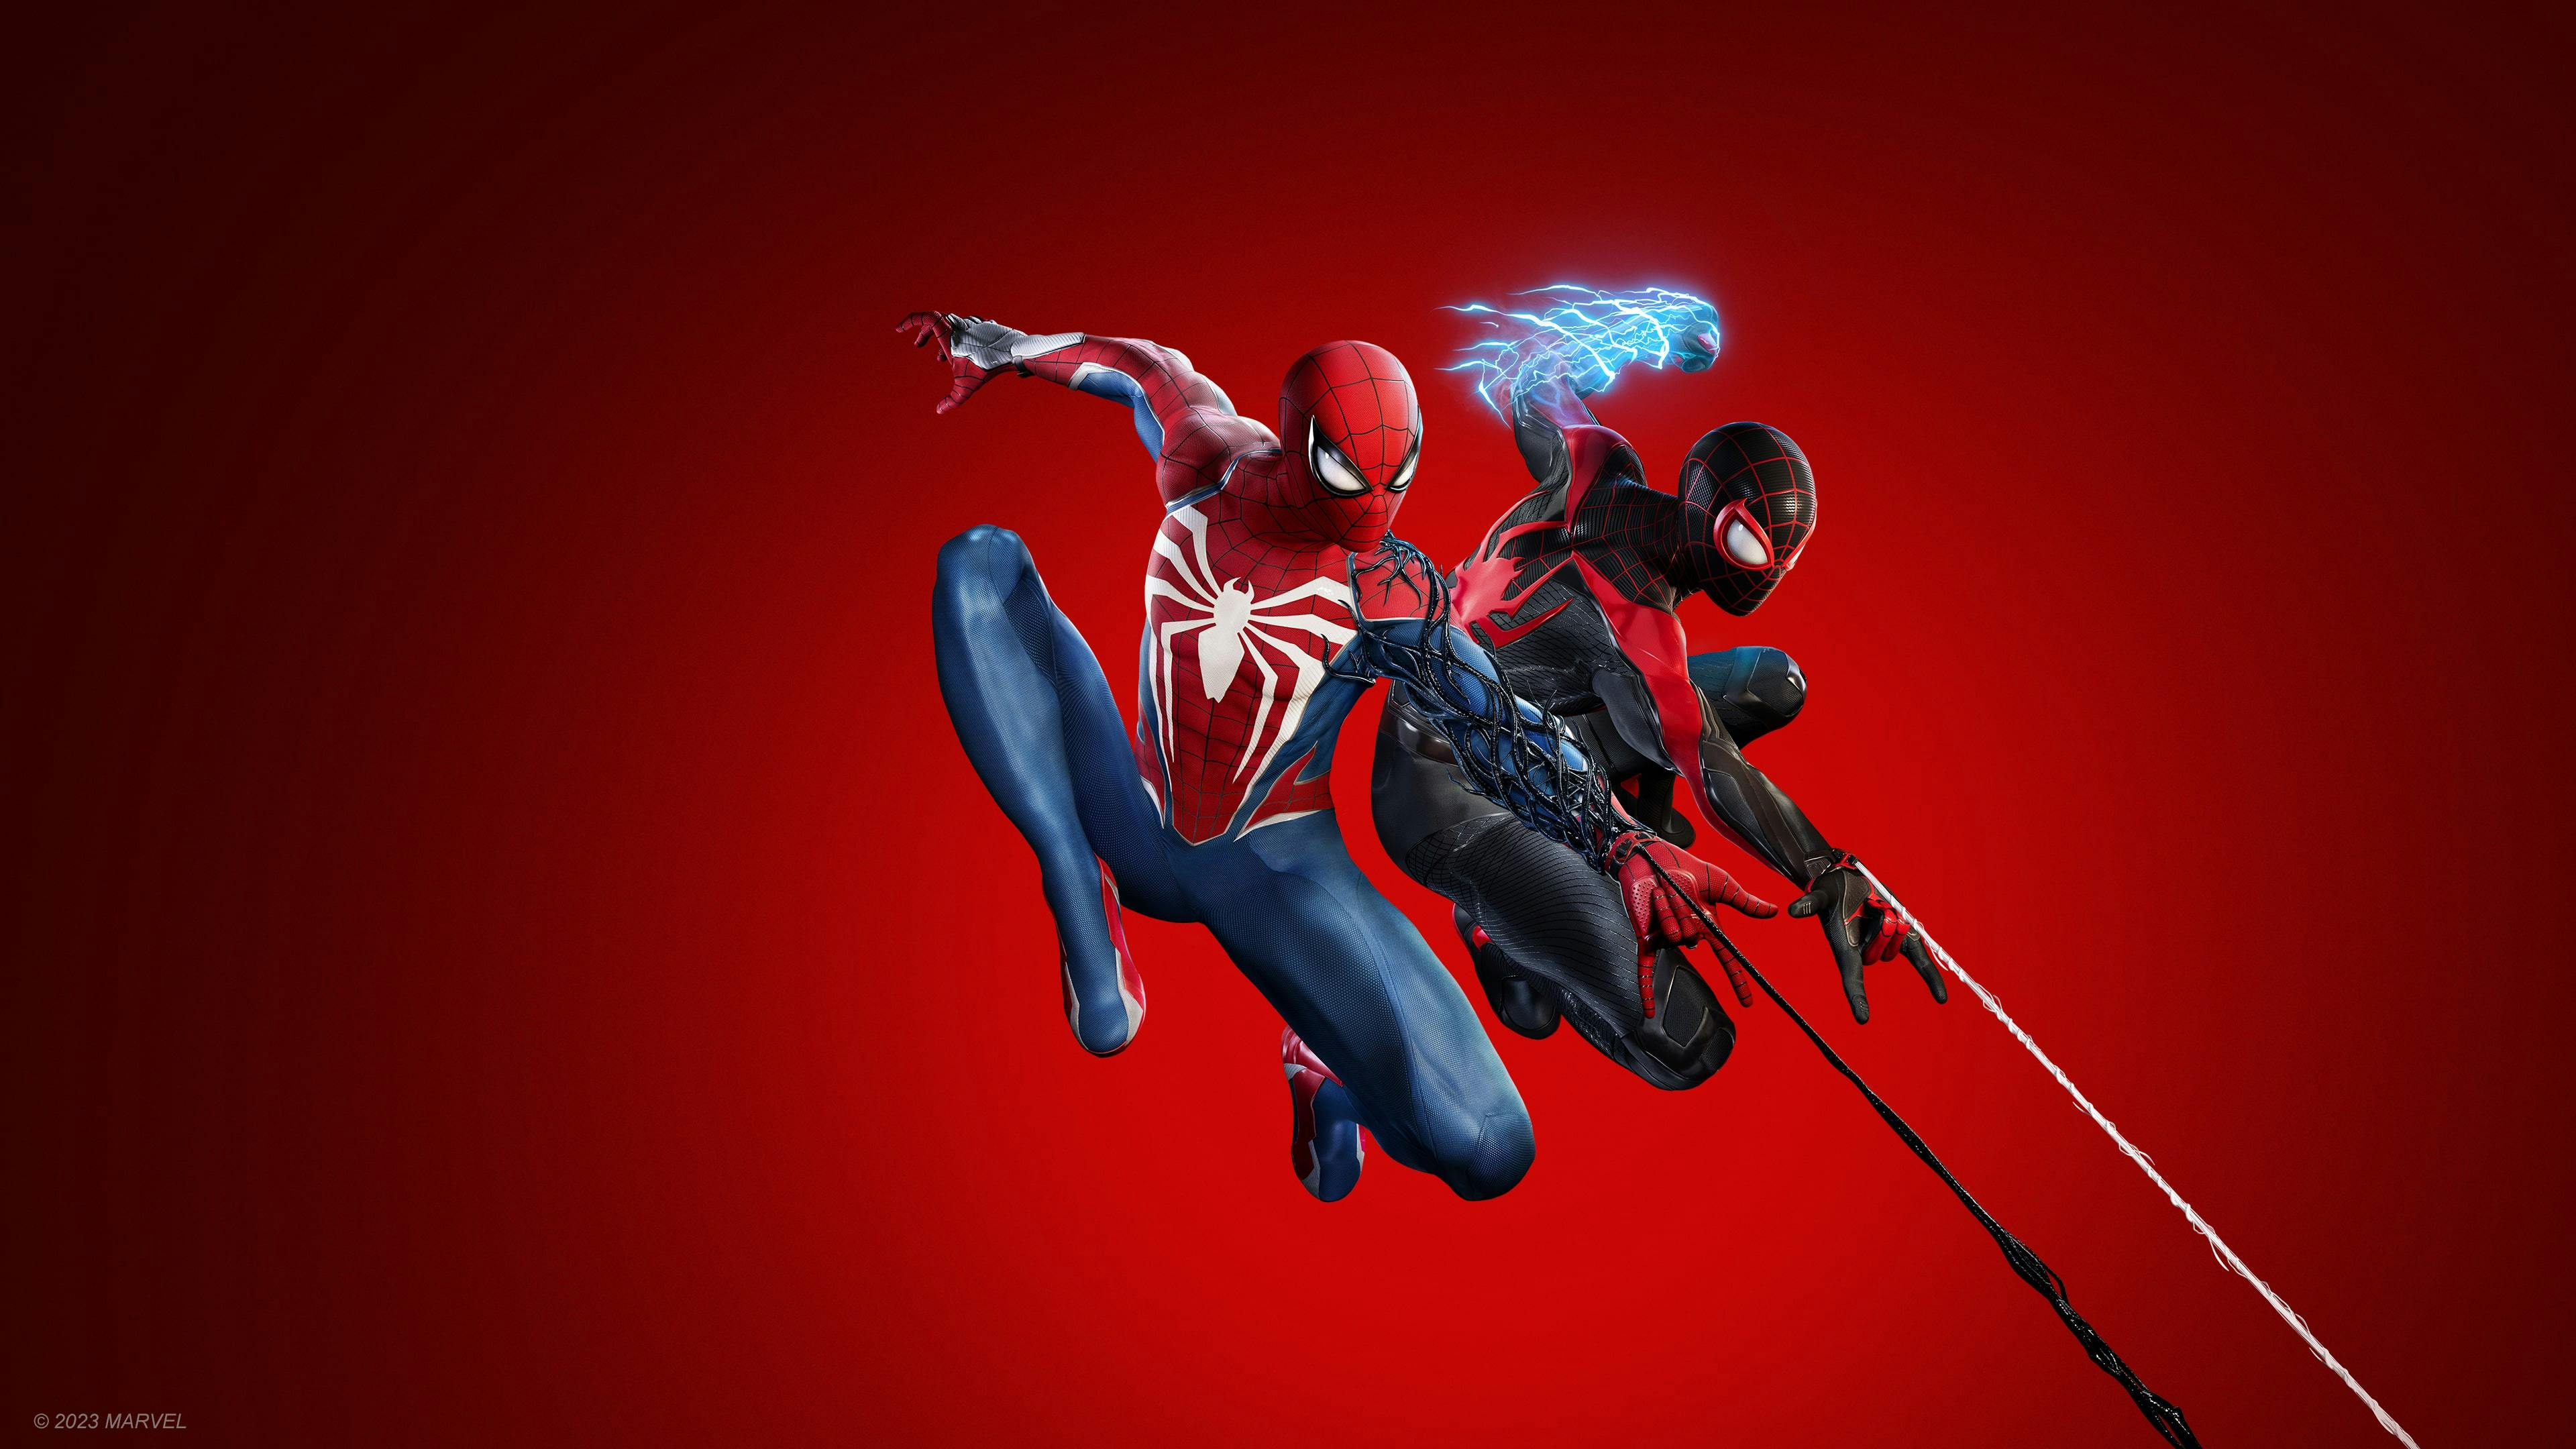 Spiderman 2 key art featuring Peter Parker and Miles Morales suited up side by side.